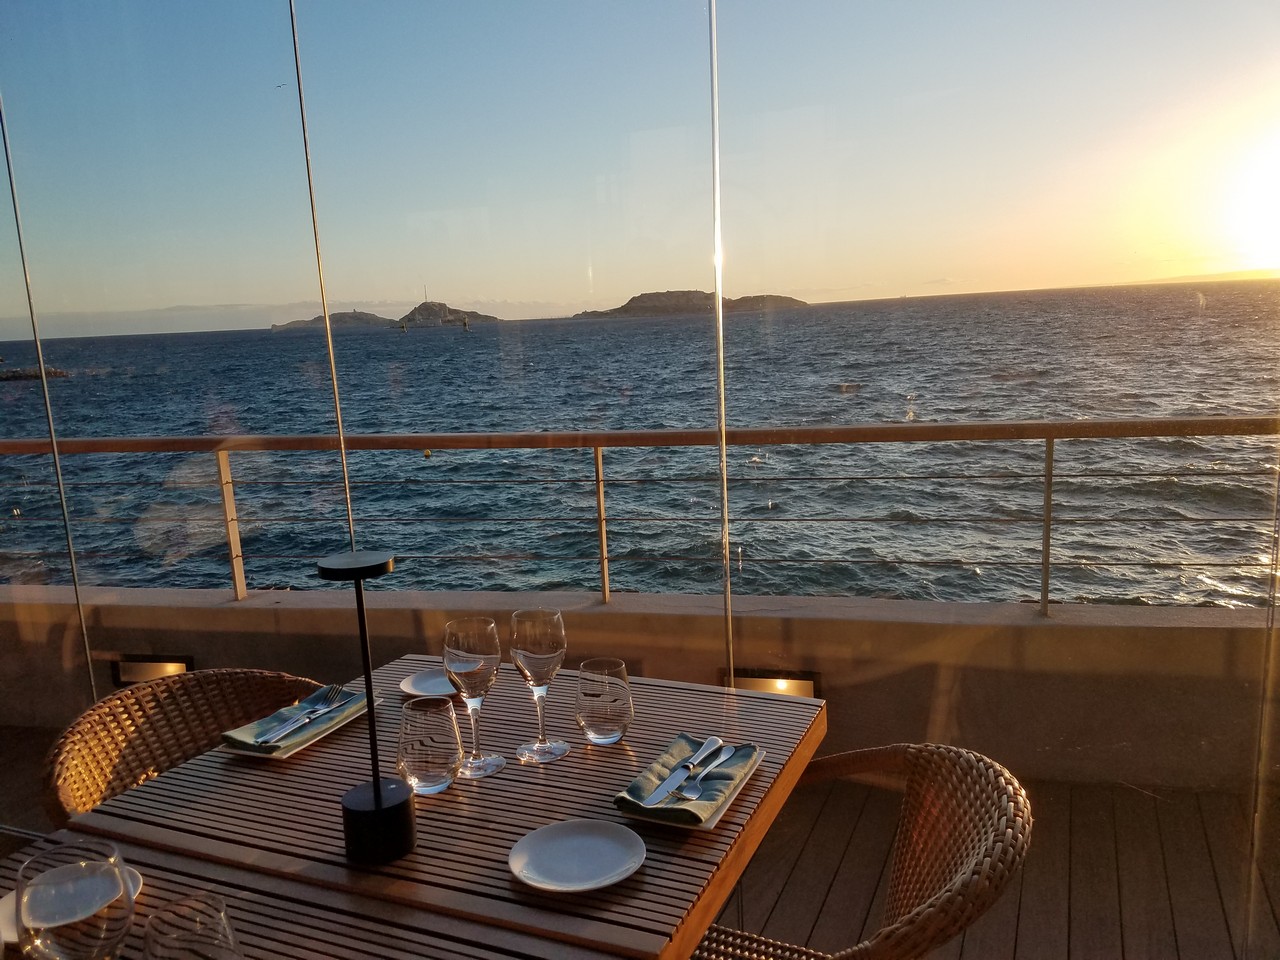 a table with plates and glasses on a deck overlooking water